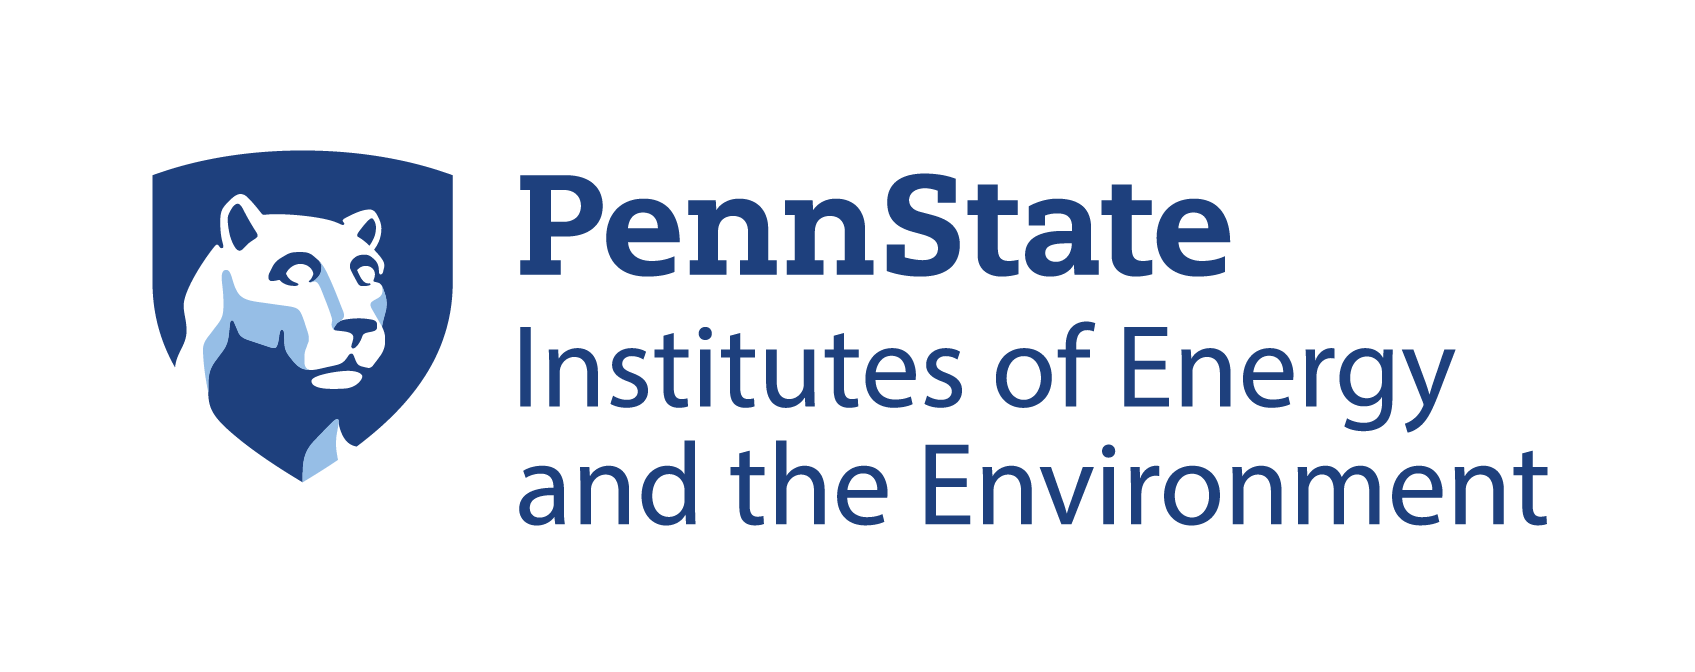 Penn State Institute of Energy and the Environment